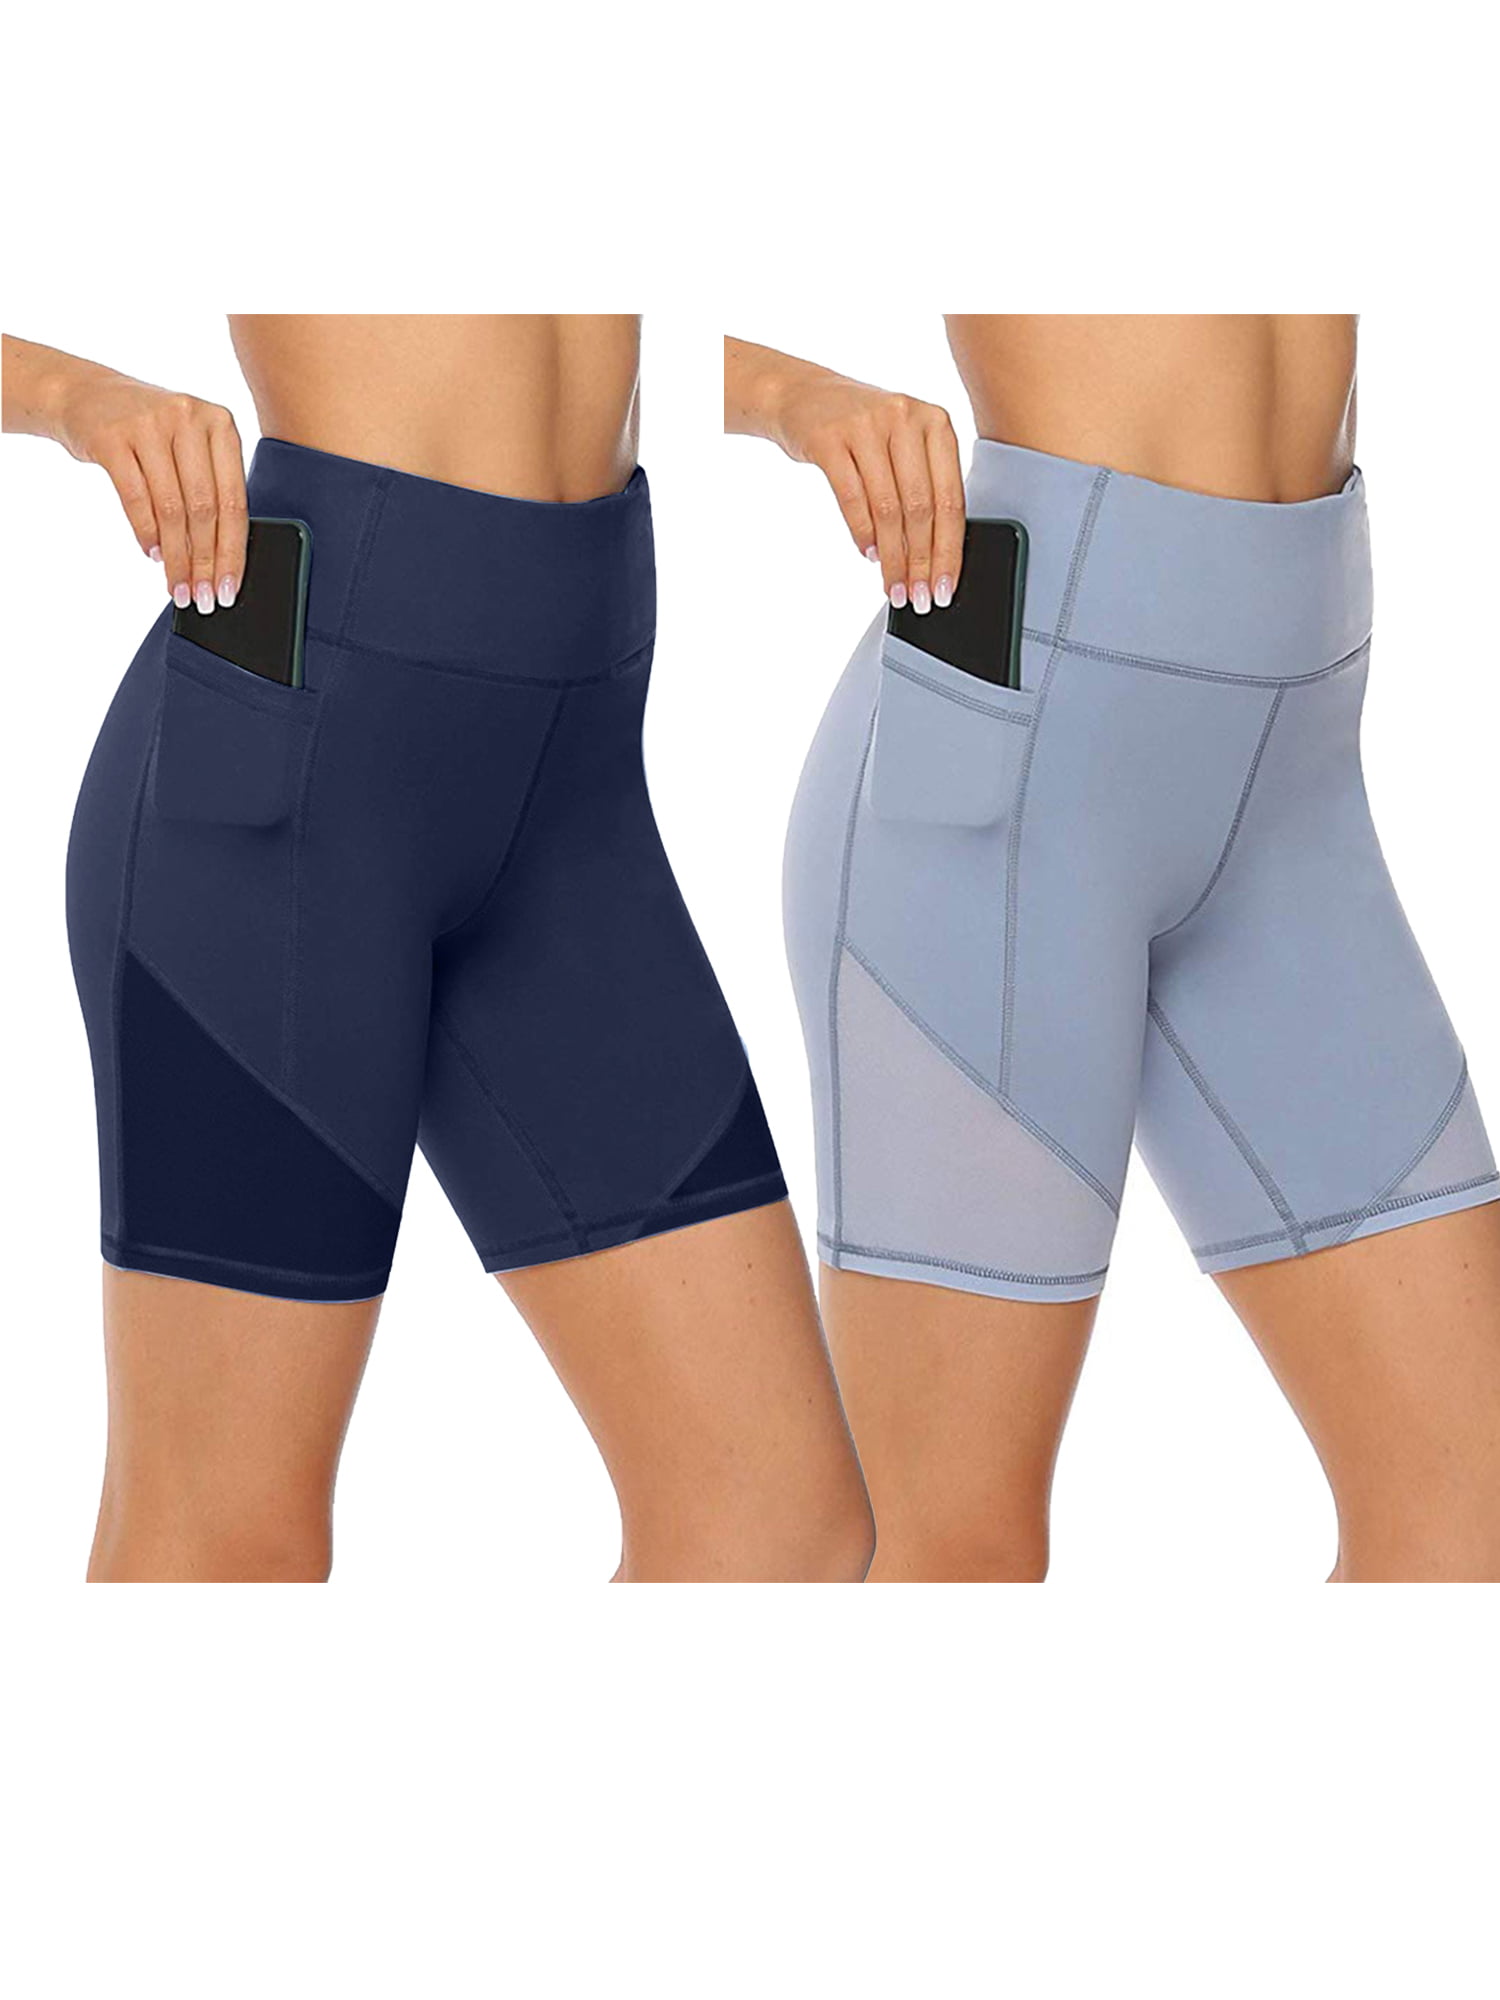 Ladies Cotton Leggings 1/2 Length Above-Knee Shorts Active Sport Dance Cycling 